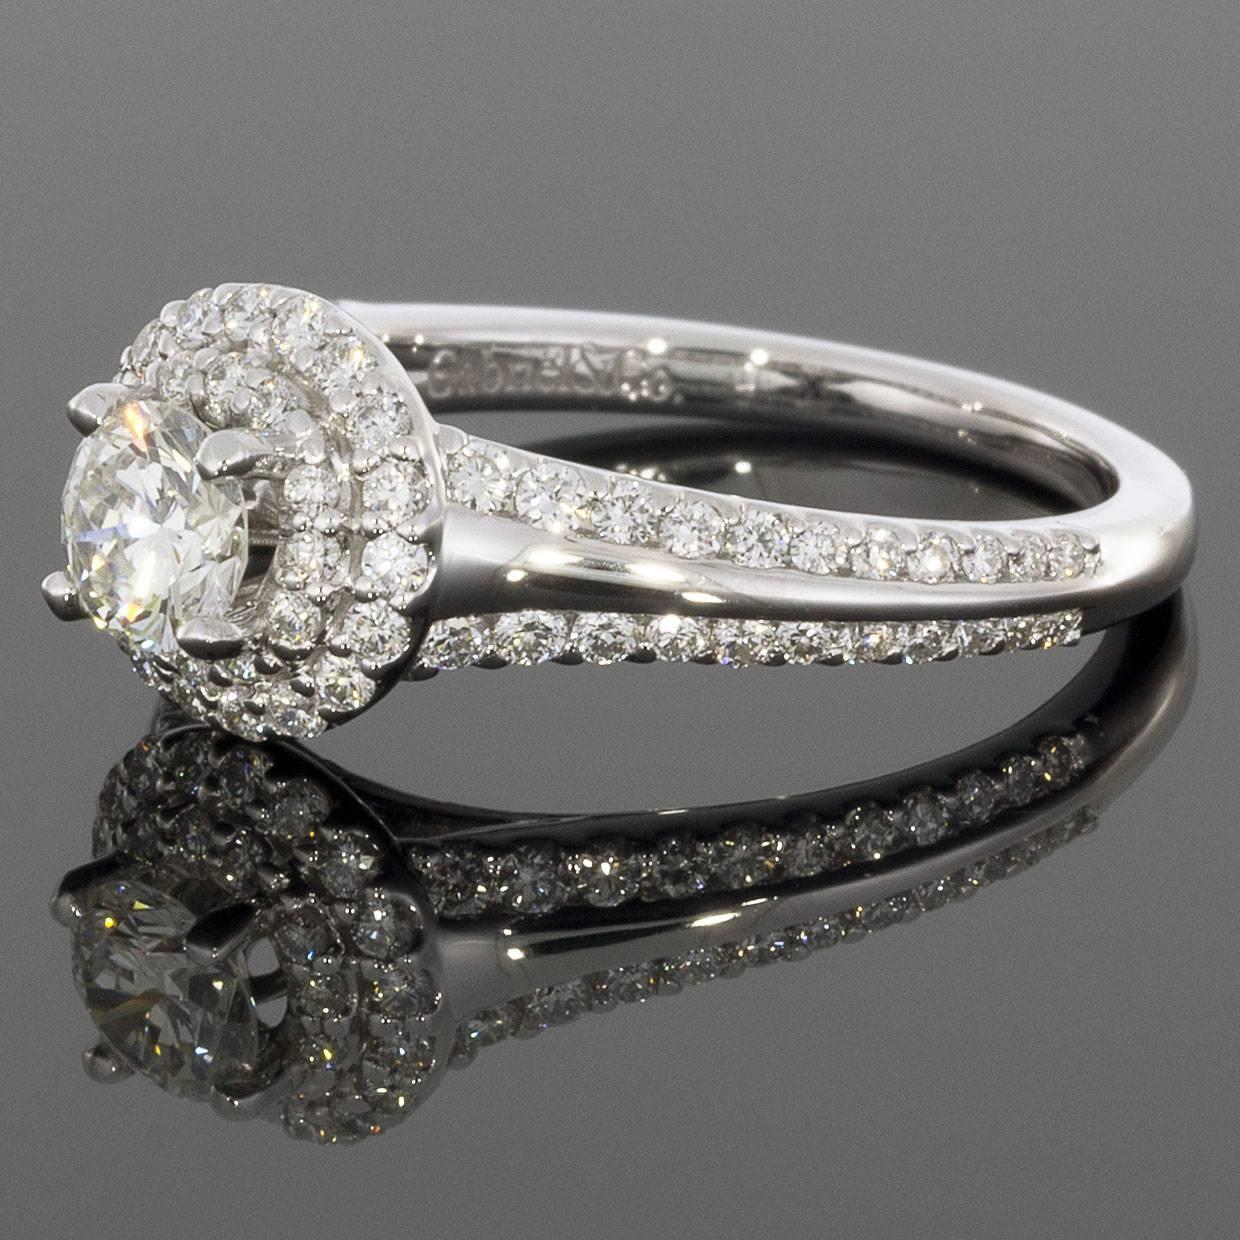 Details:
14K White Gold
0.41CT I/SI1 Round center diamond
0.59CTW Accent diamonds
Finger size 6.5
Comes in a beautiful presentation box
An adult signature will be required for delivery unless other arrangements are made prior to purchasing